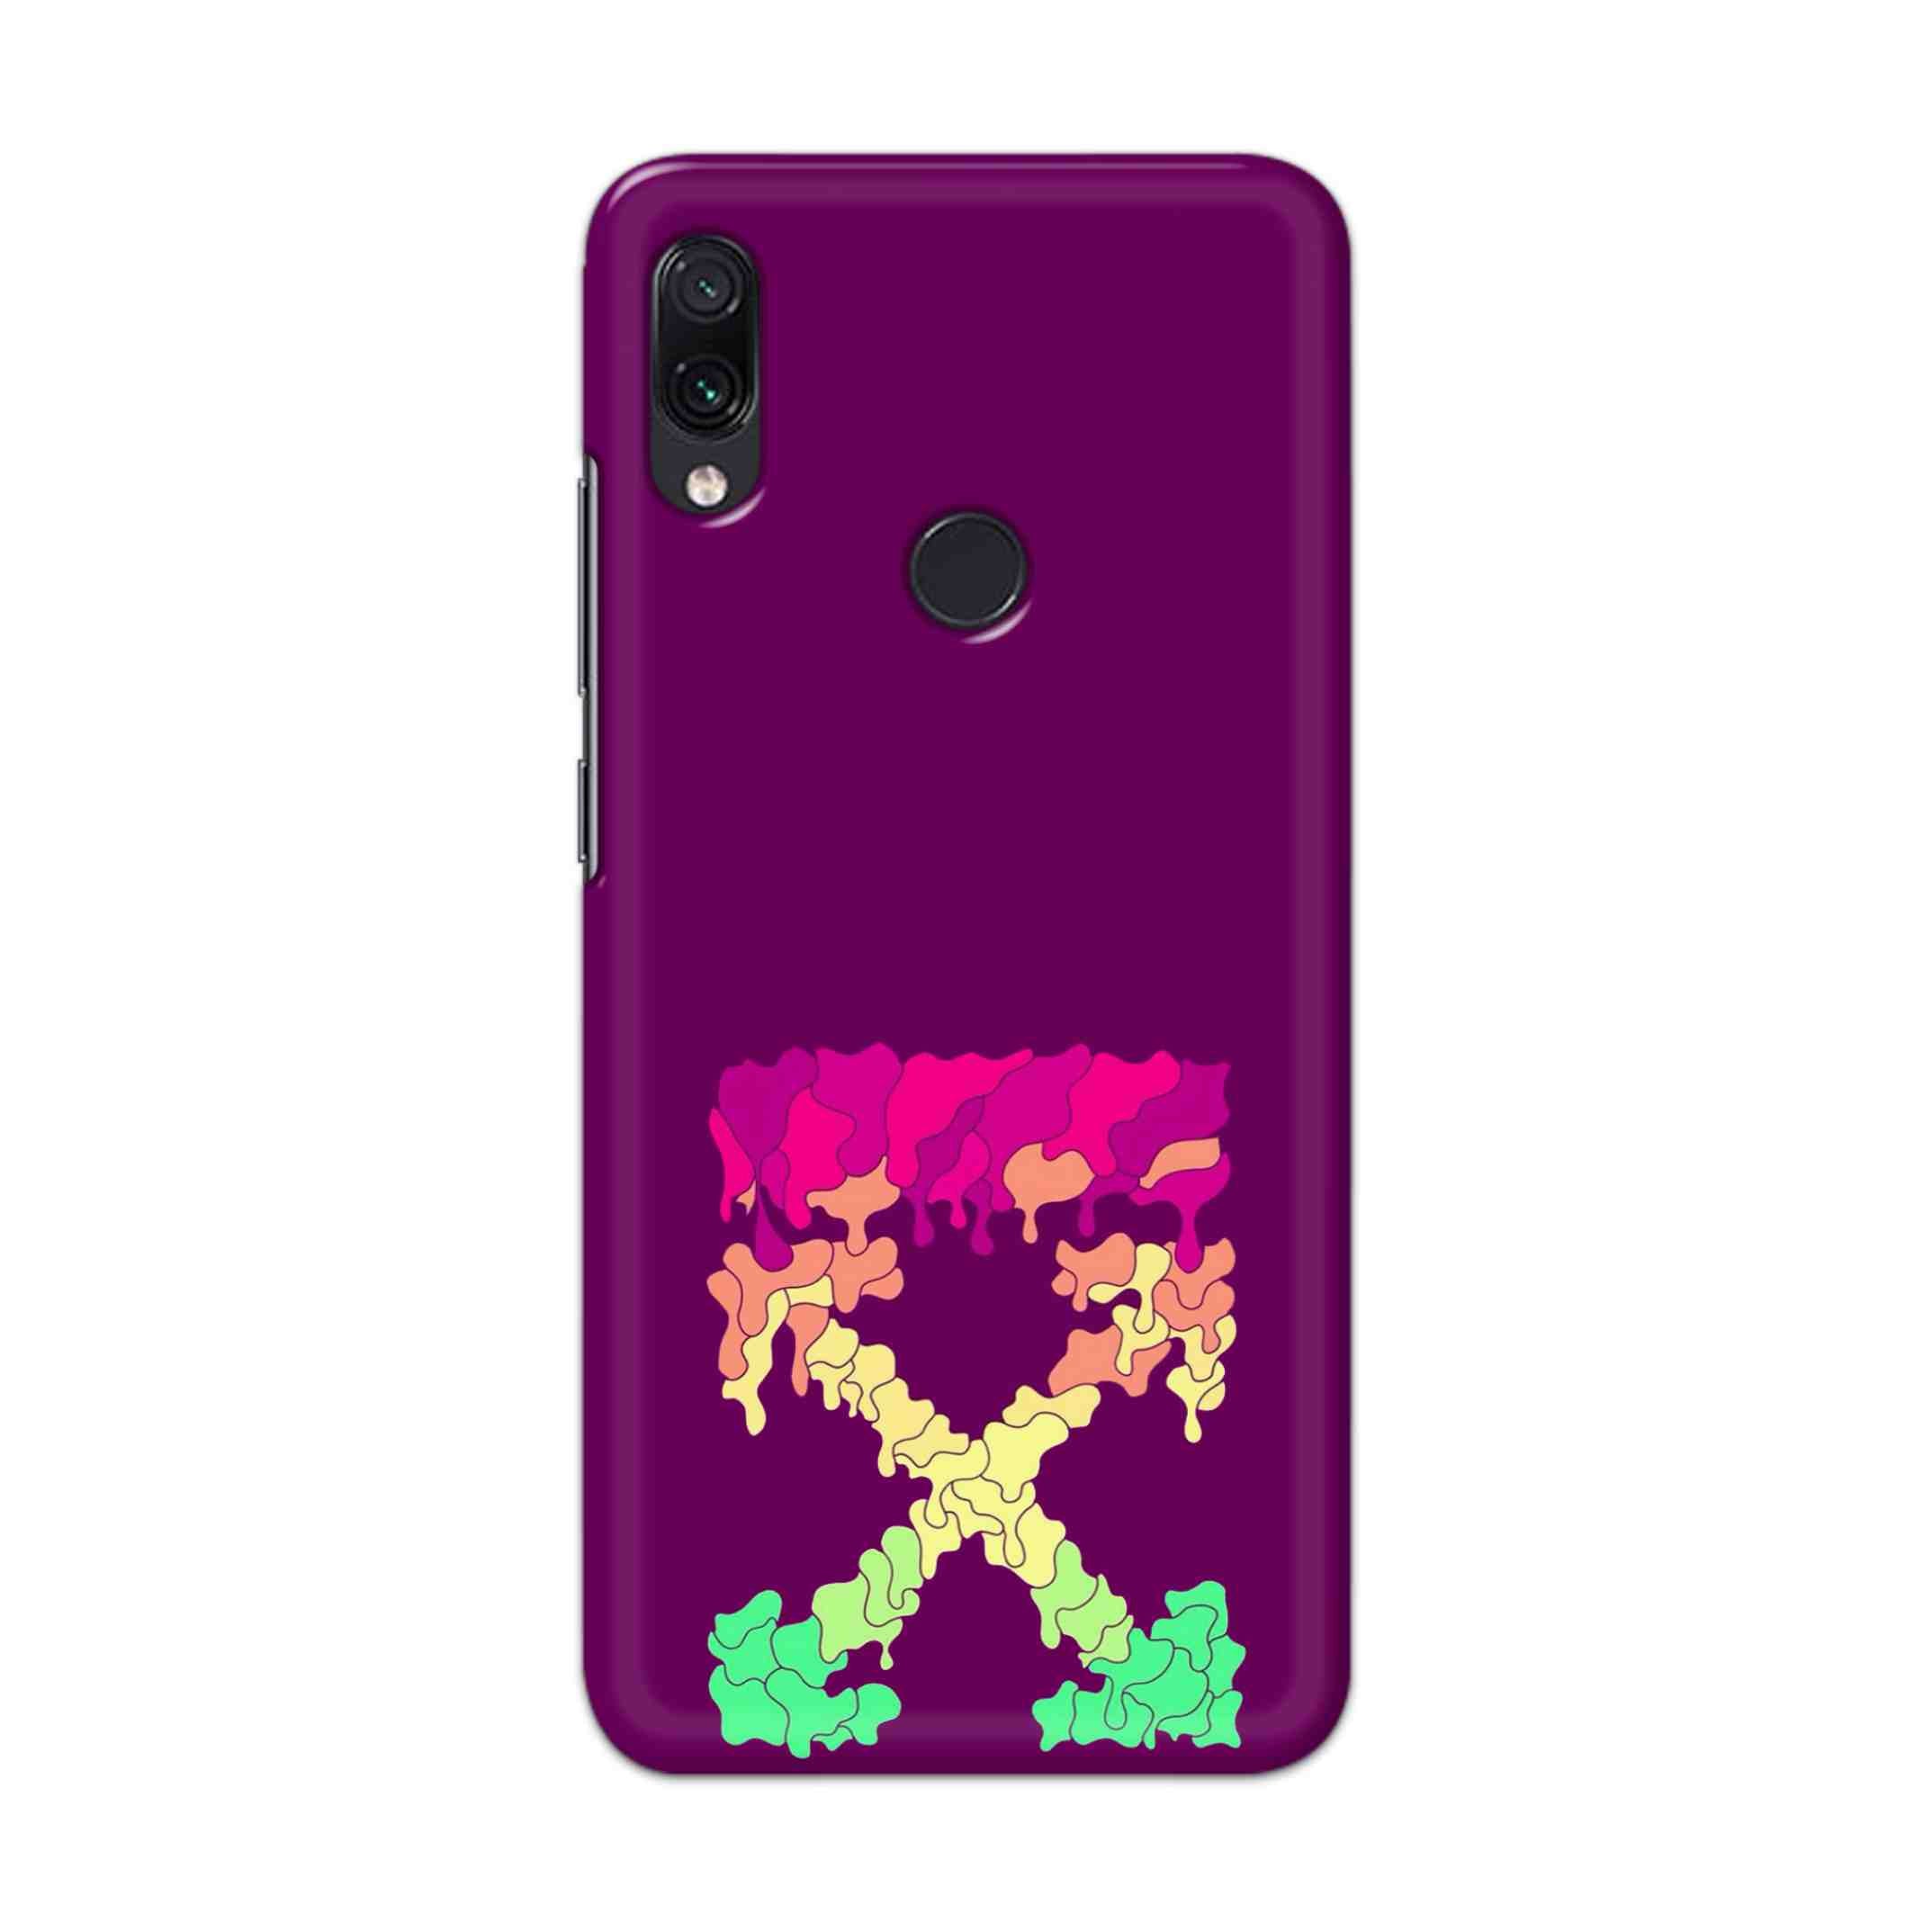 Buy X.O Hard Back Mobile Phone Case Cover For Redmi Note 7 / Note 7 Pro Online